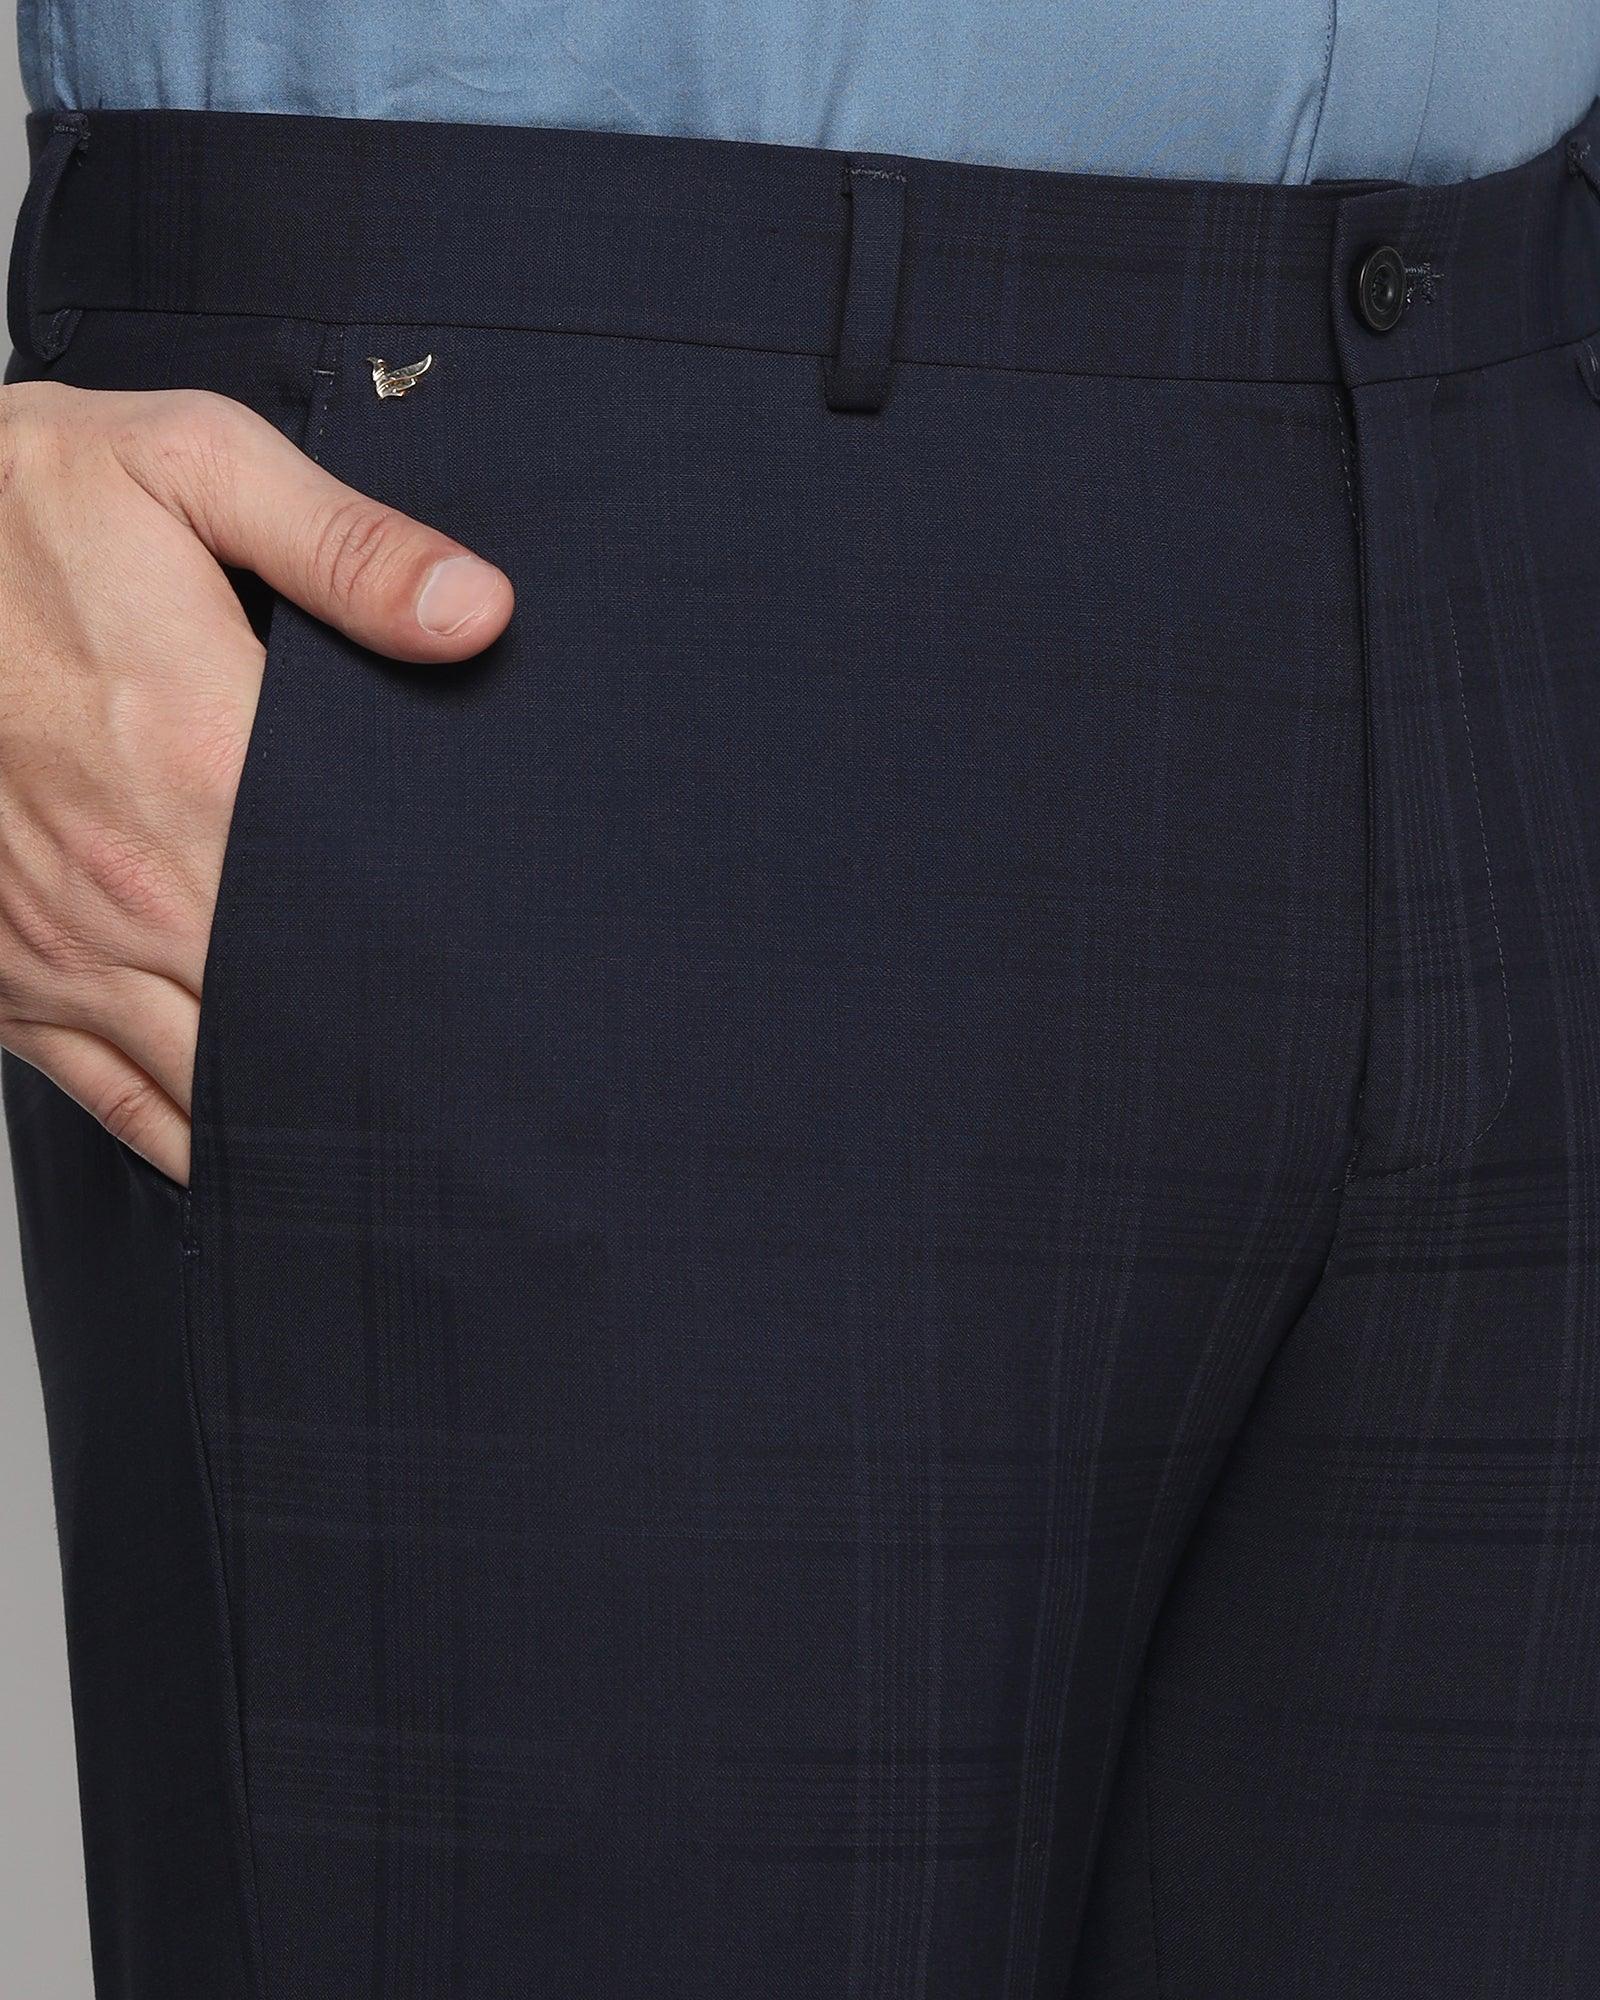 Luxe Slim Comfort B-95 Formal Navy Check Trouser - Norm